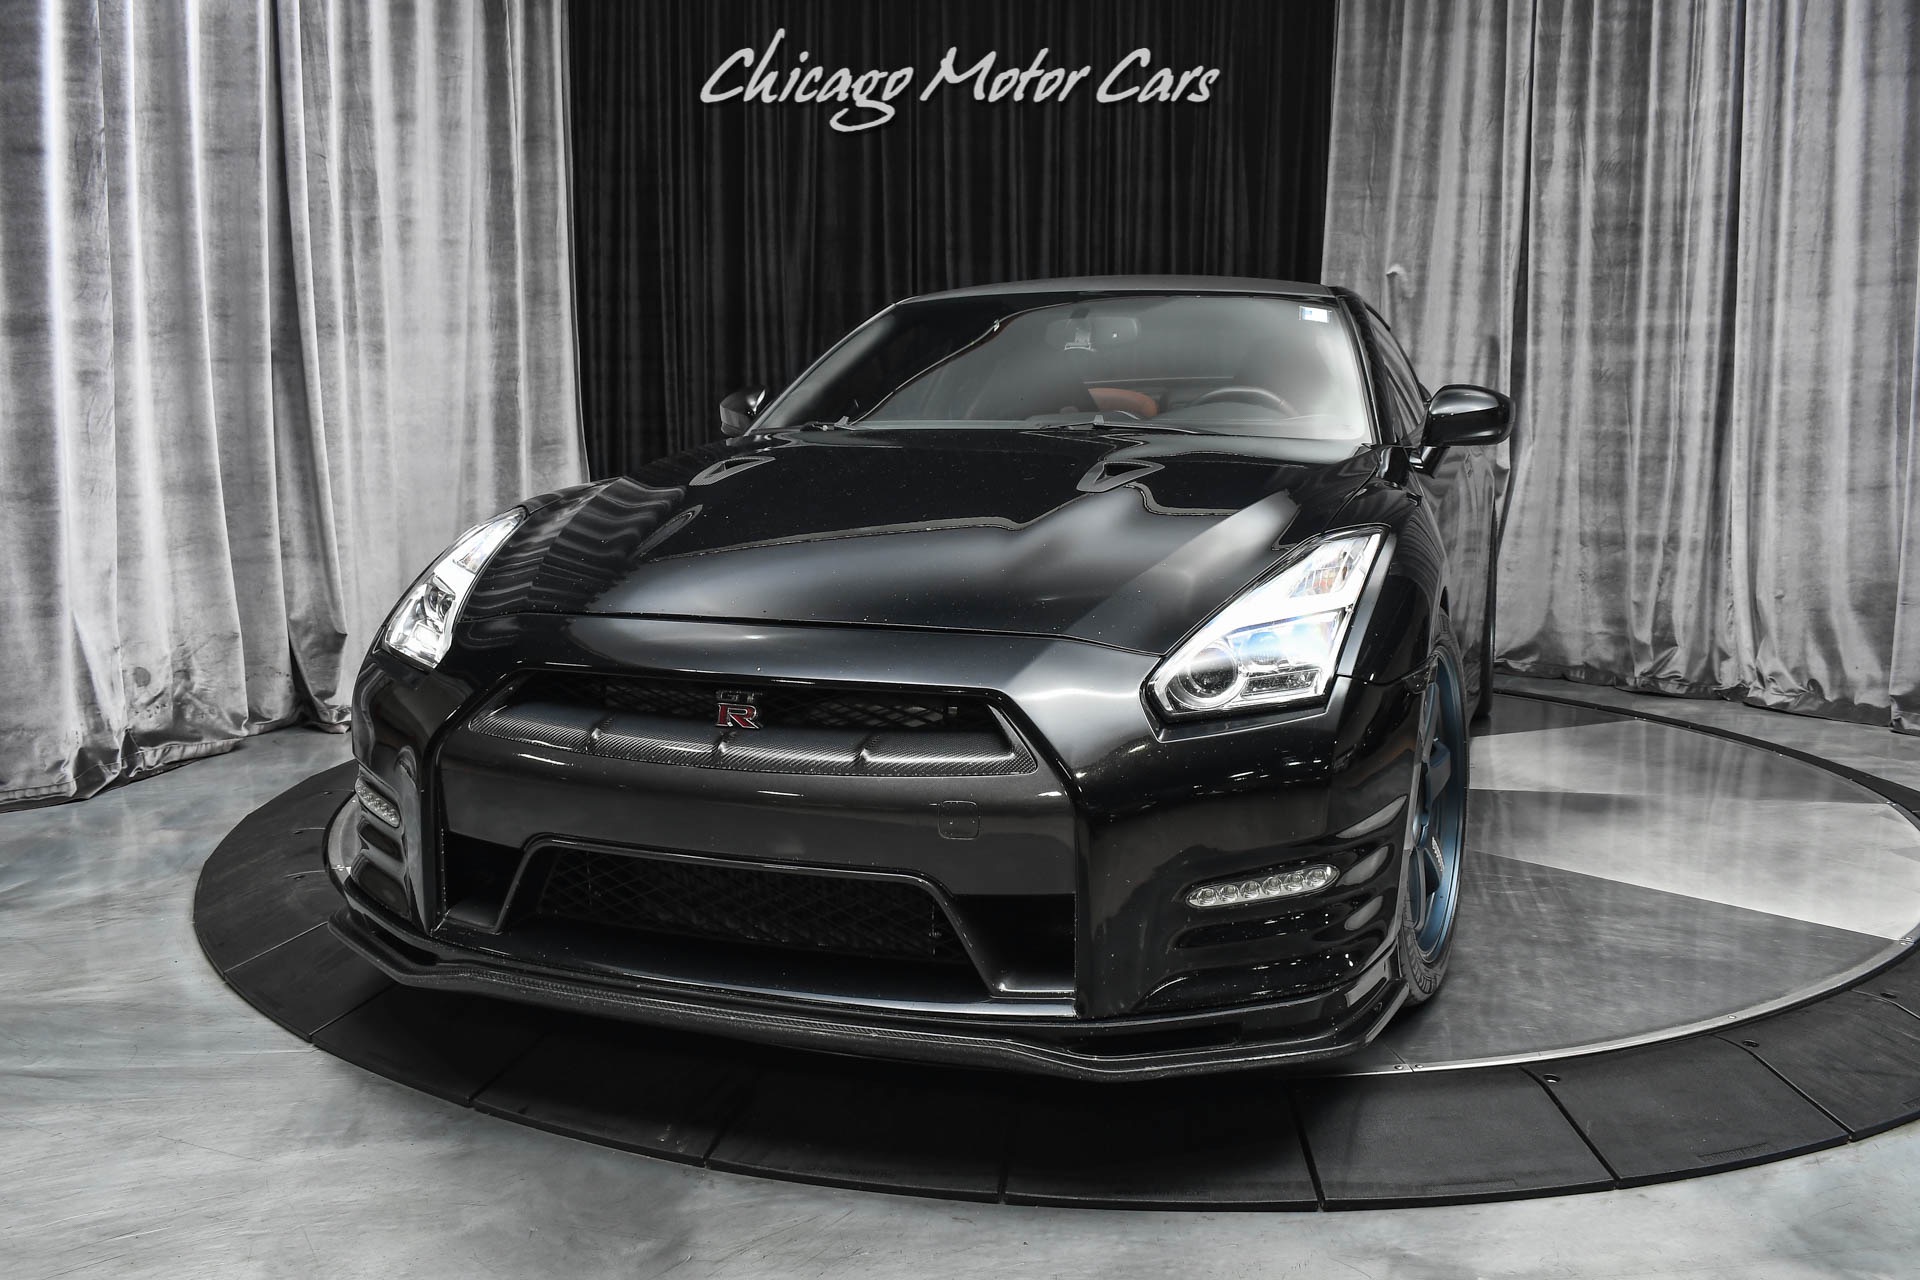 Used-2014-Nissan-GT-R-Premium-AMS-OMEGA-12-1150WHP-8-Second-14-Mile